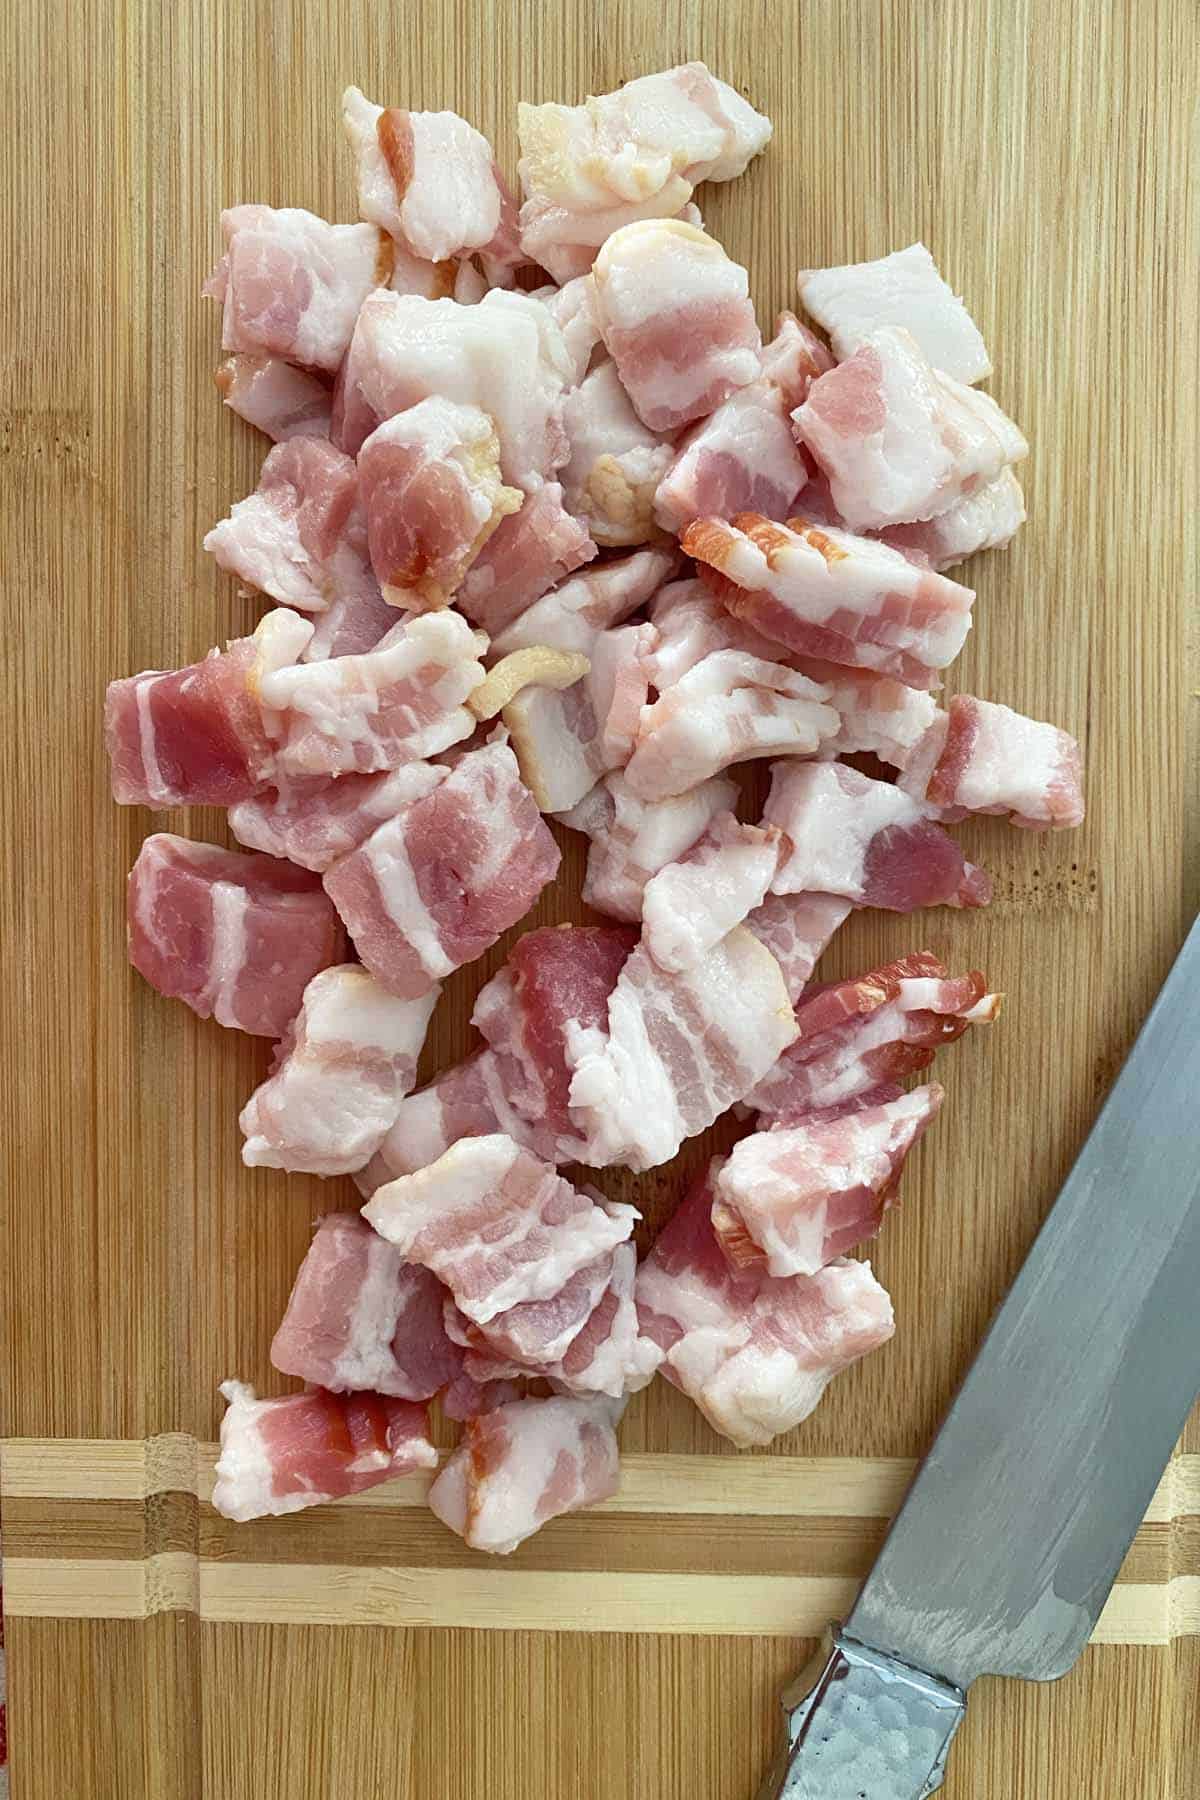 a knife and chopped bacon on a cutting board.